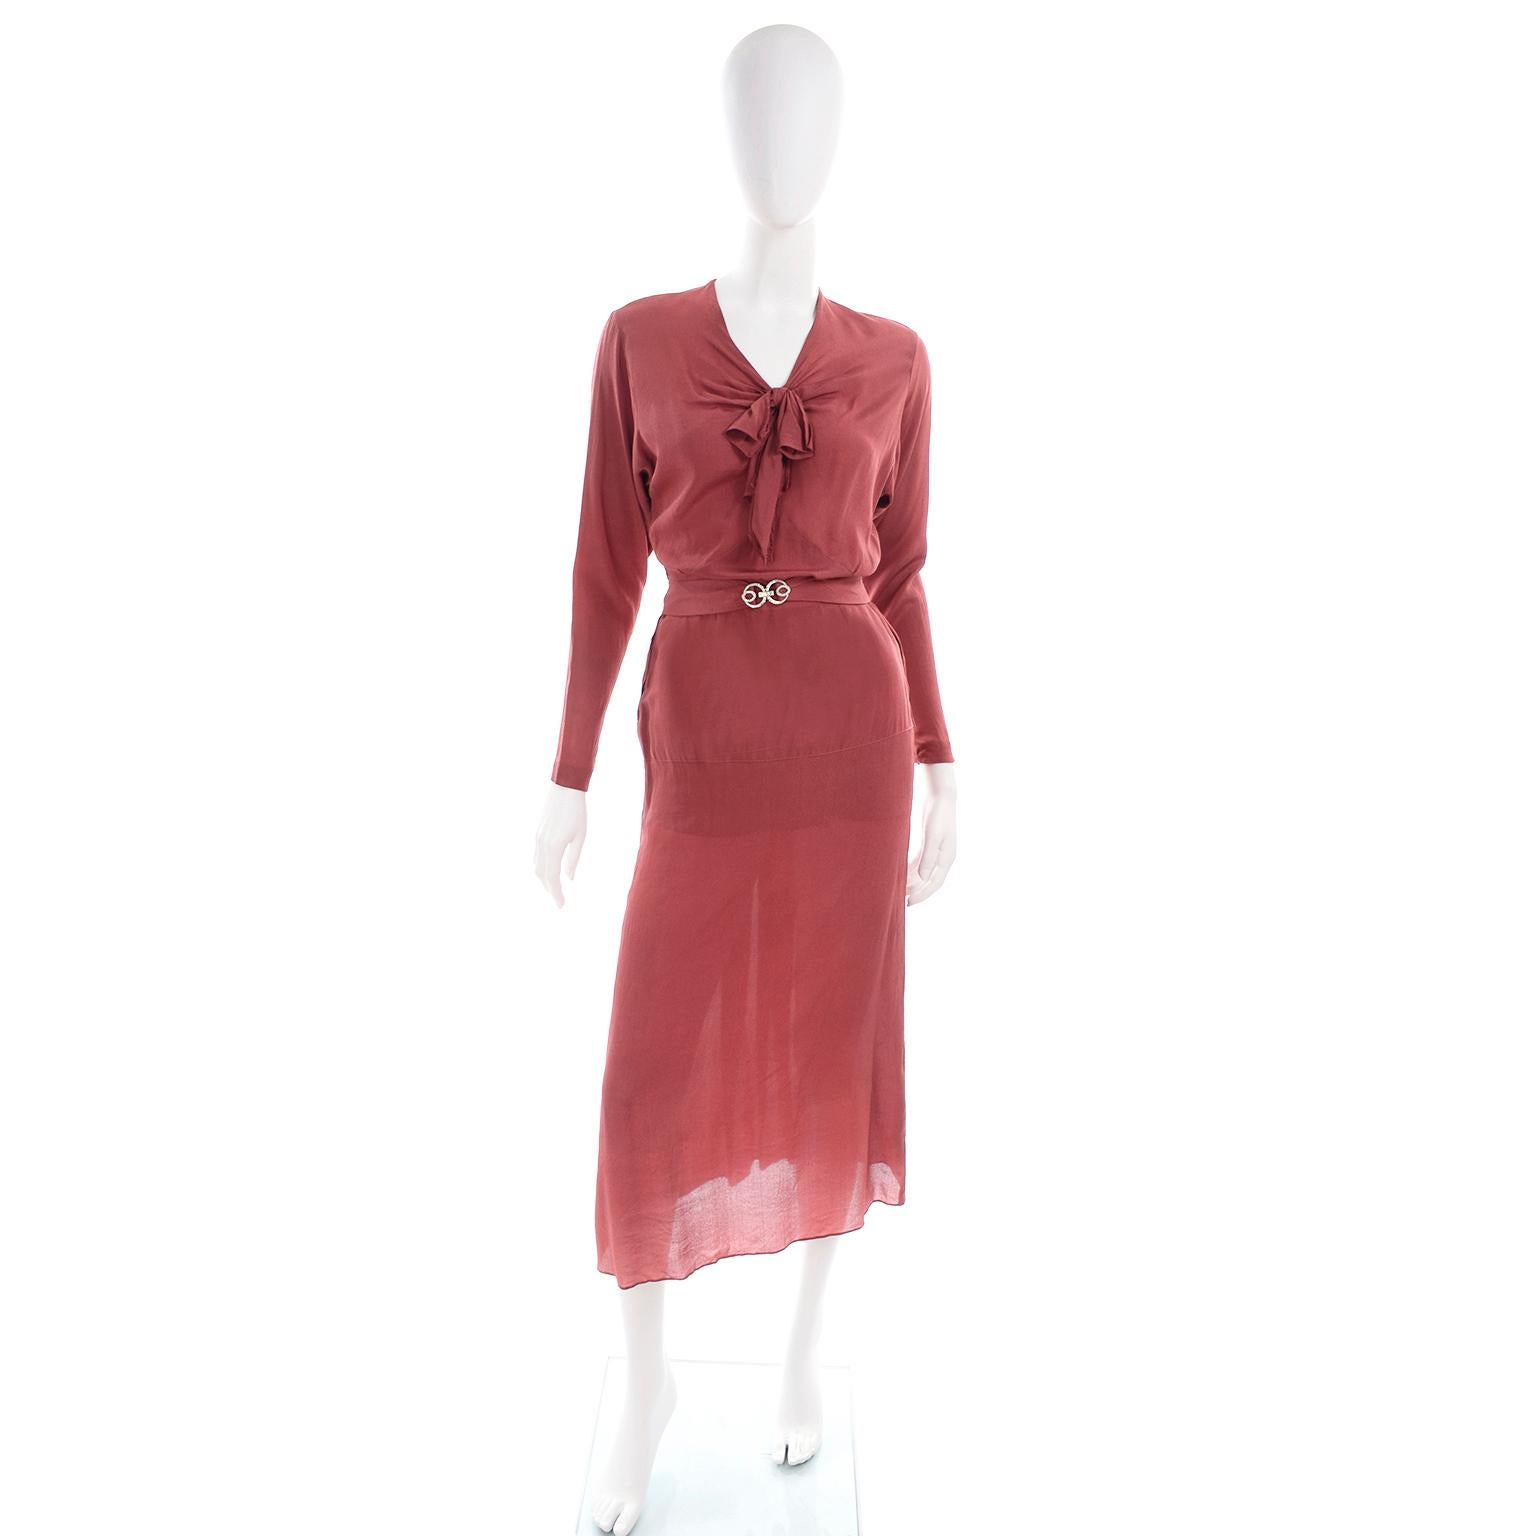 This is a vintage 1930's two piece rust red silk dress with a matching belt with original sash buckle. This top of the dress has long sleeves with gathered tucks on the elbows, a V neckline and a bow. The skirt has back pleats and hits a few inches